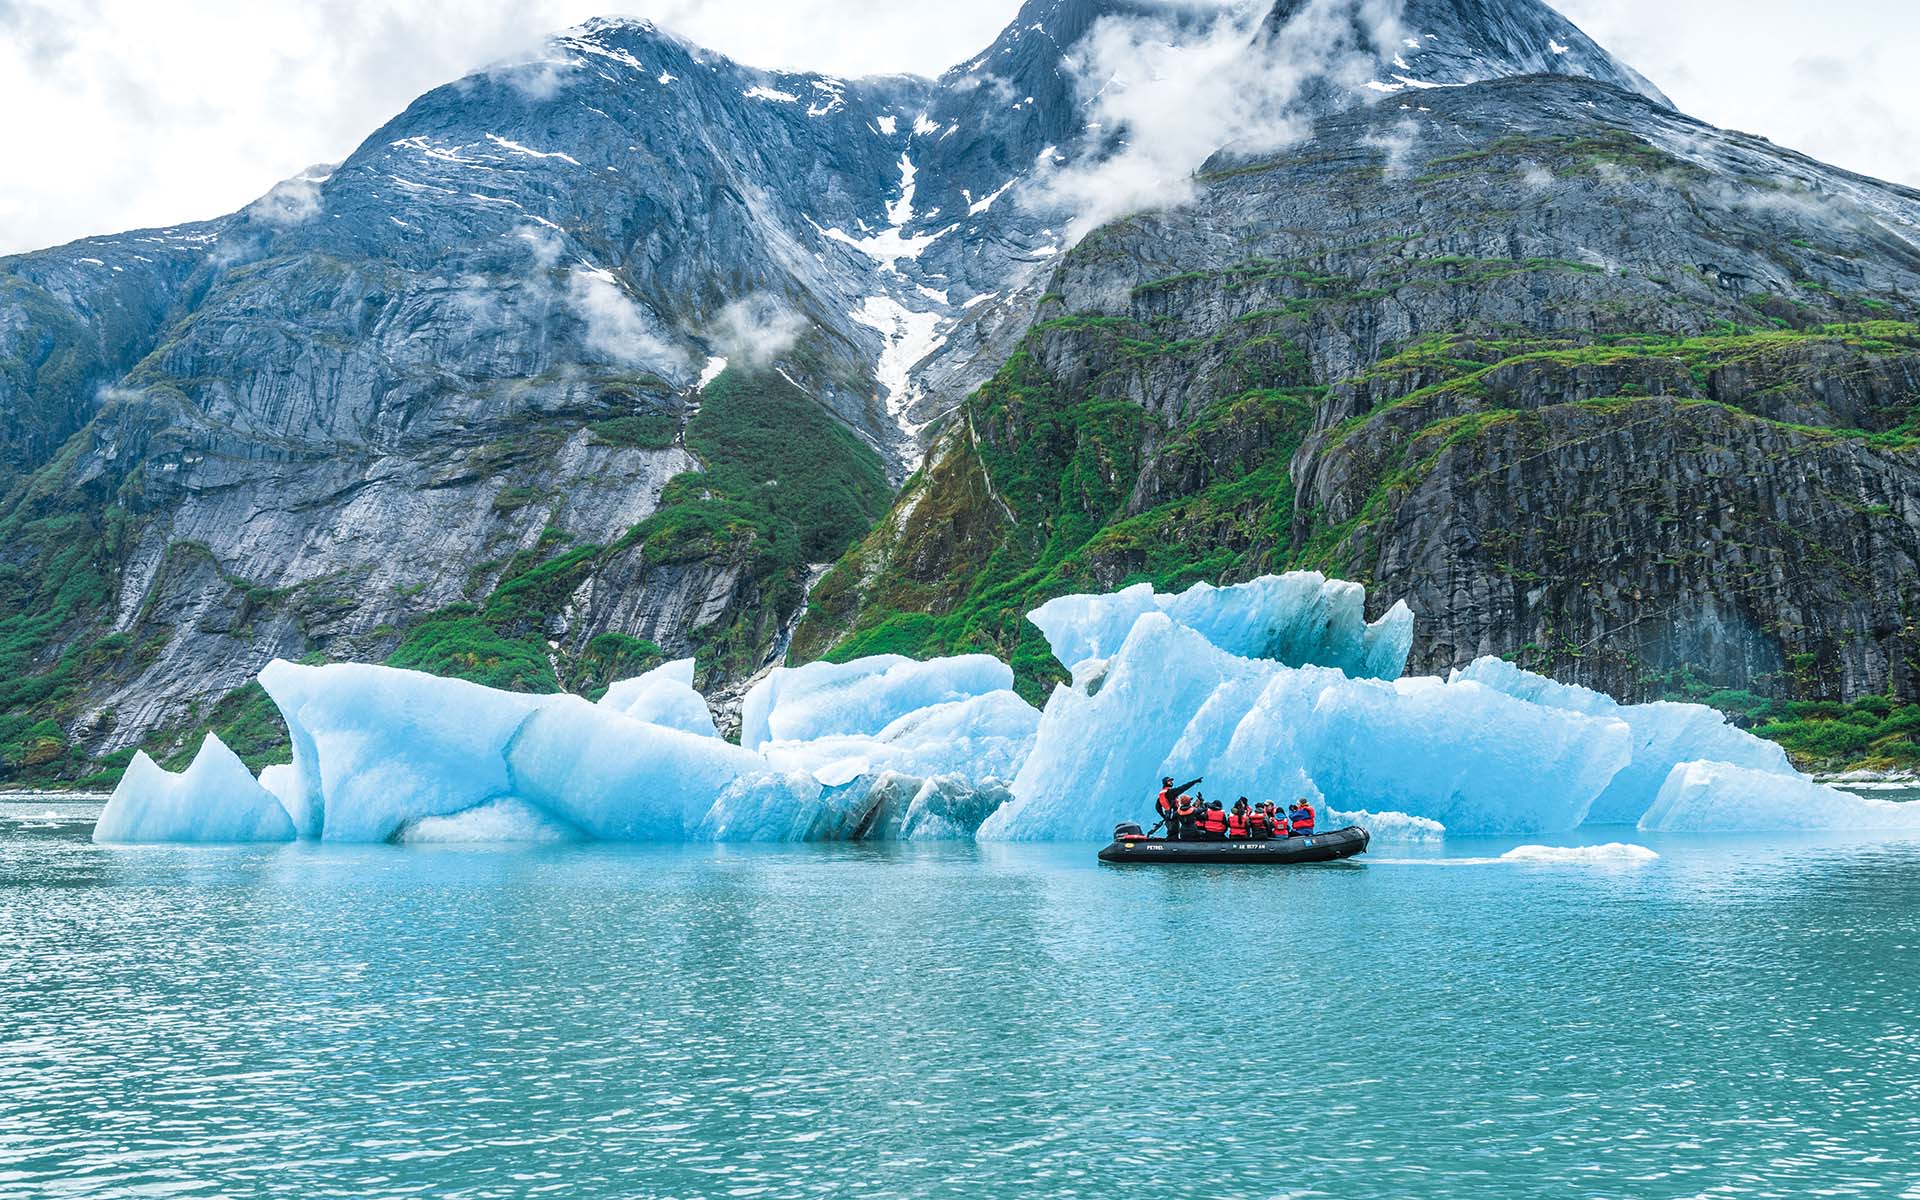 A guide on a zodiac filled with passengers in red life jackets points as he cruises the small boat among bright blue glaciers in front of a steep rocky shoreline in Alaska.